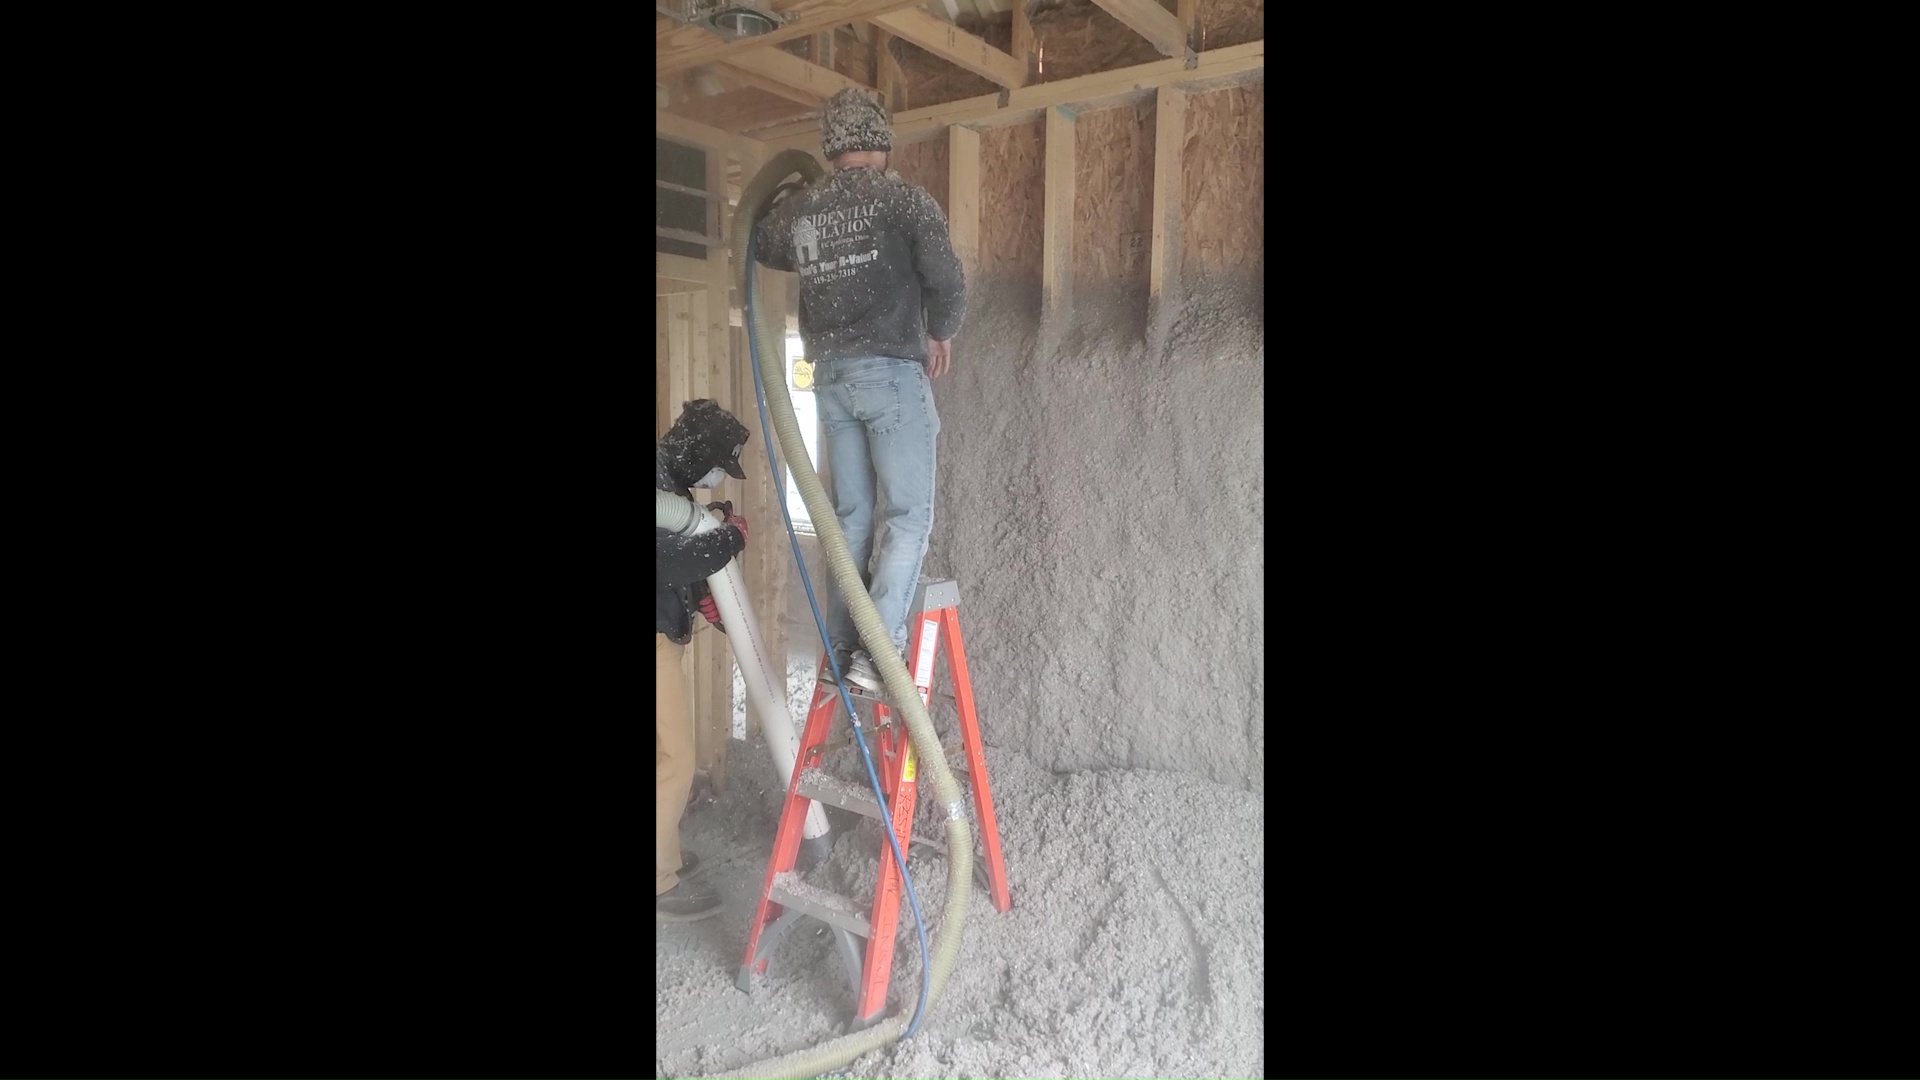 Cellulose Insulation: Spraying and Recycling Cellulose